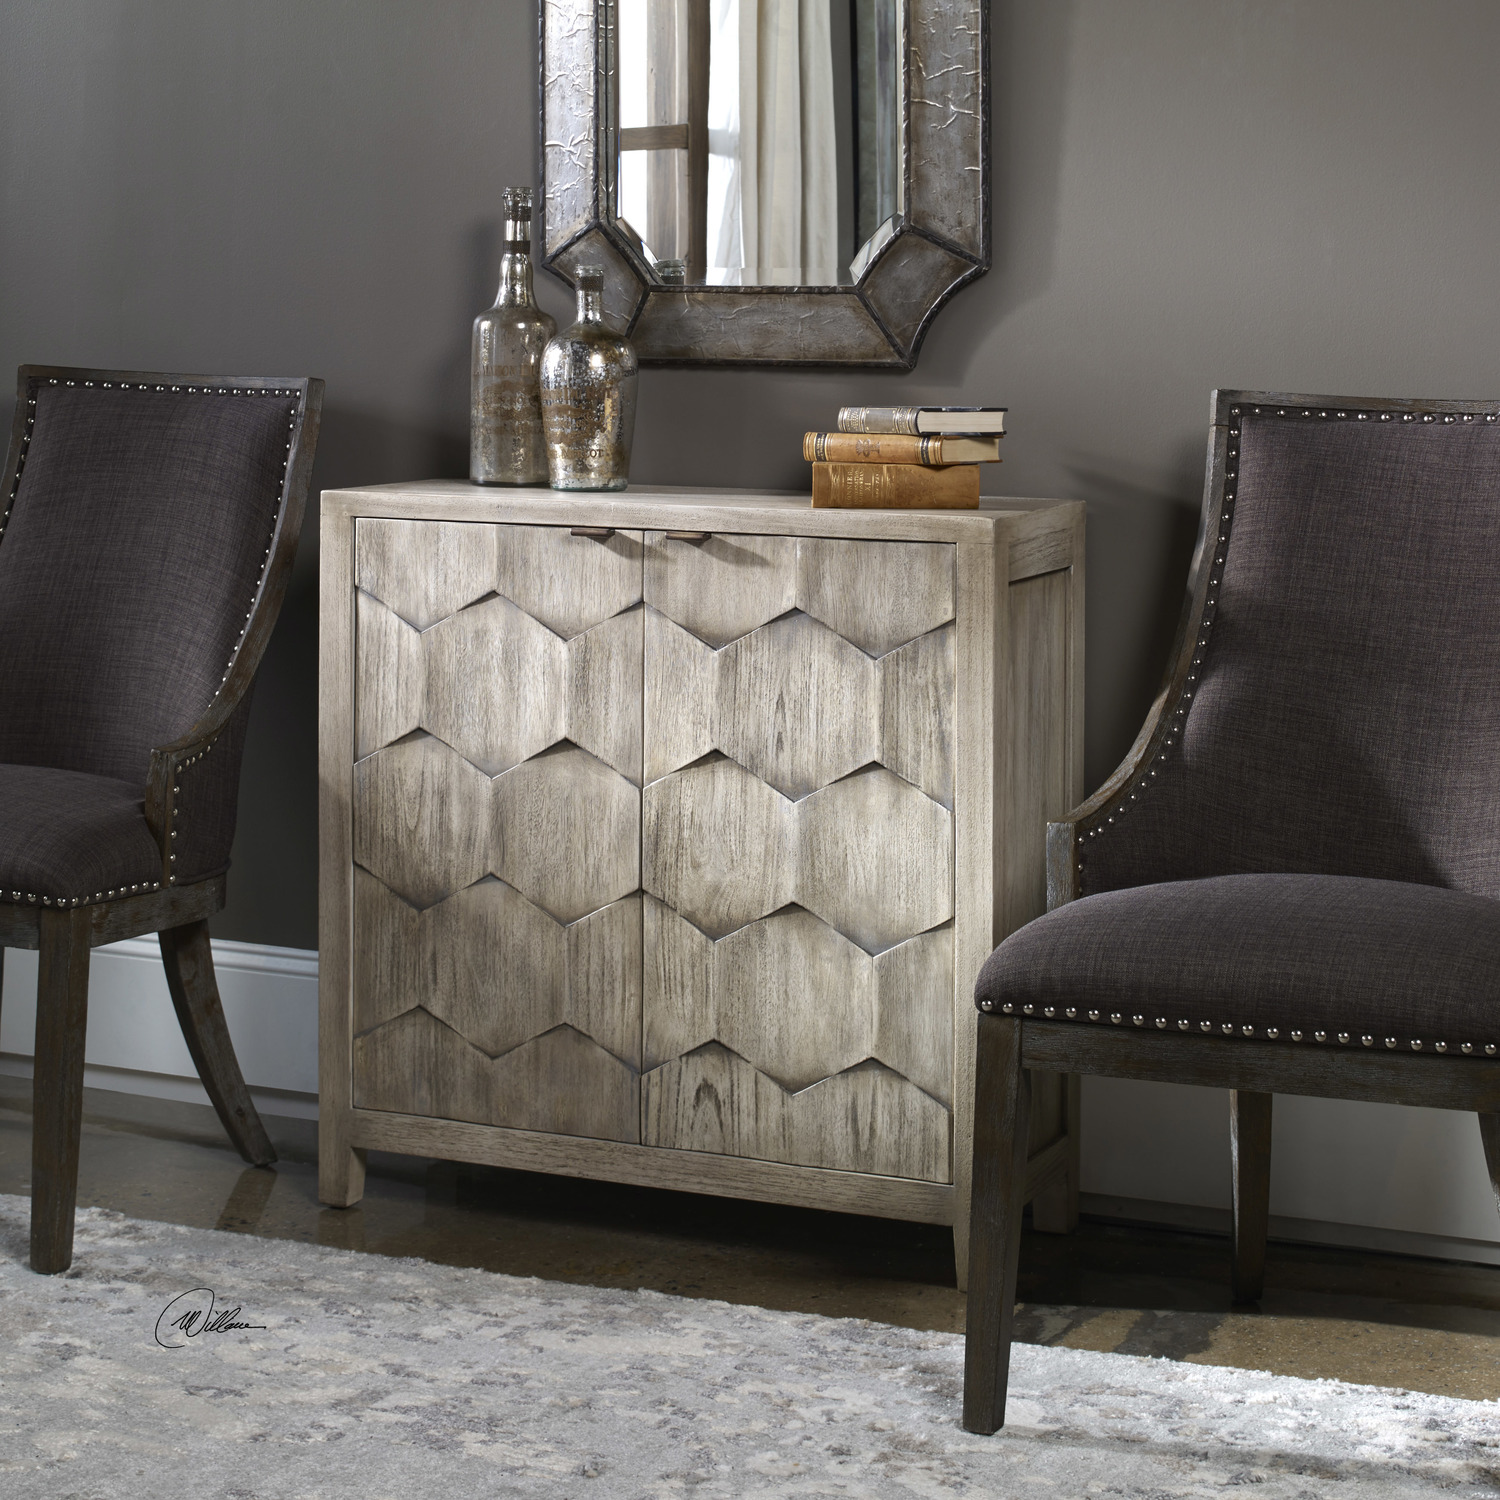 grey drawers for bedroom Uttermost  Console Cabinet Expert Craftsmanship Is Displayed In The Three Dimensional Honeycomb Striped Doors In Smoked Ivory Finished Mahogany Wood With Antique Bronze Iron Handles. Includes One Adjustable Interior Shelf.